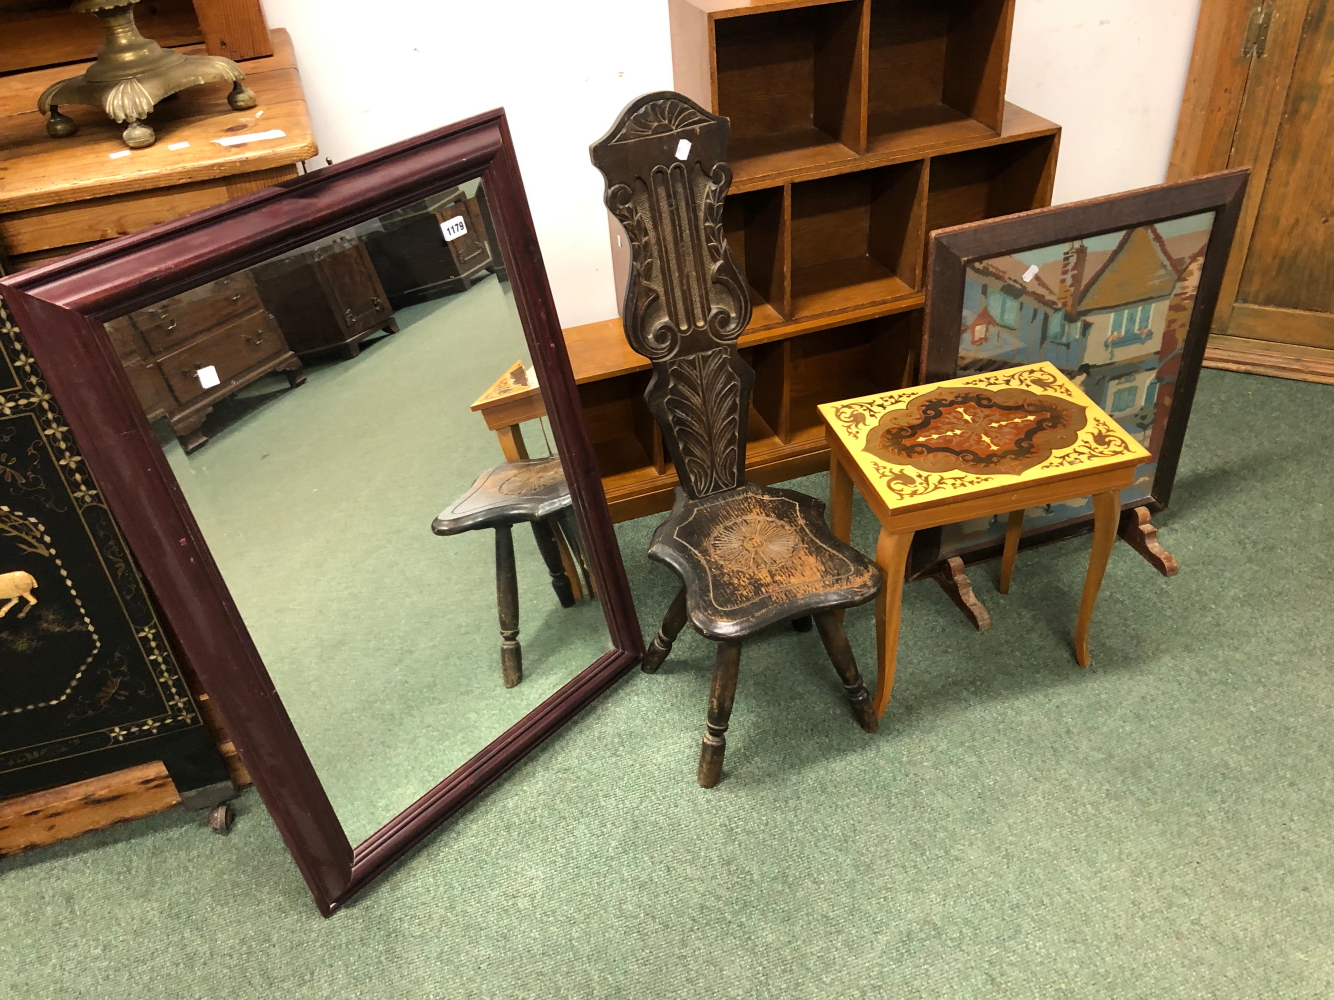 A VINTAGE OAK SPINNERS CHAIR, A MIRROR, A FIRE SCREEN AND AN OCCASIONAL TABLE. AND A GLOBE